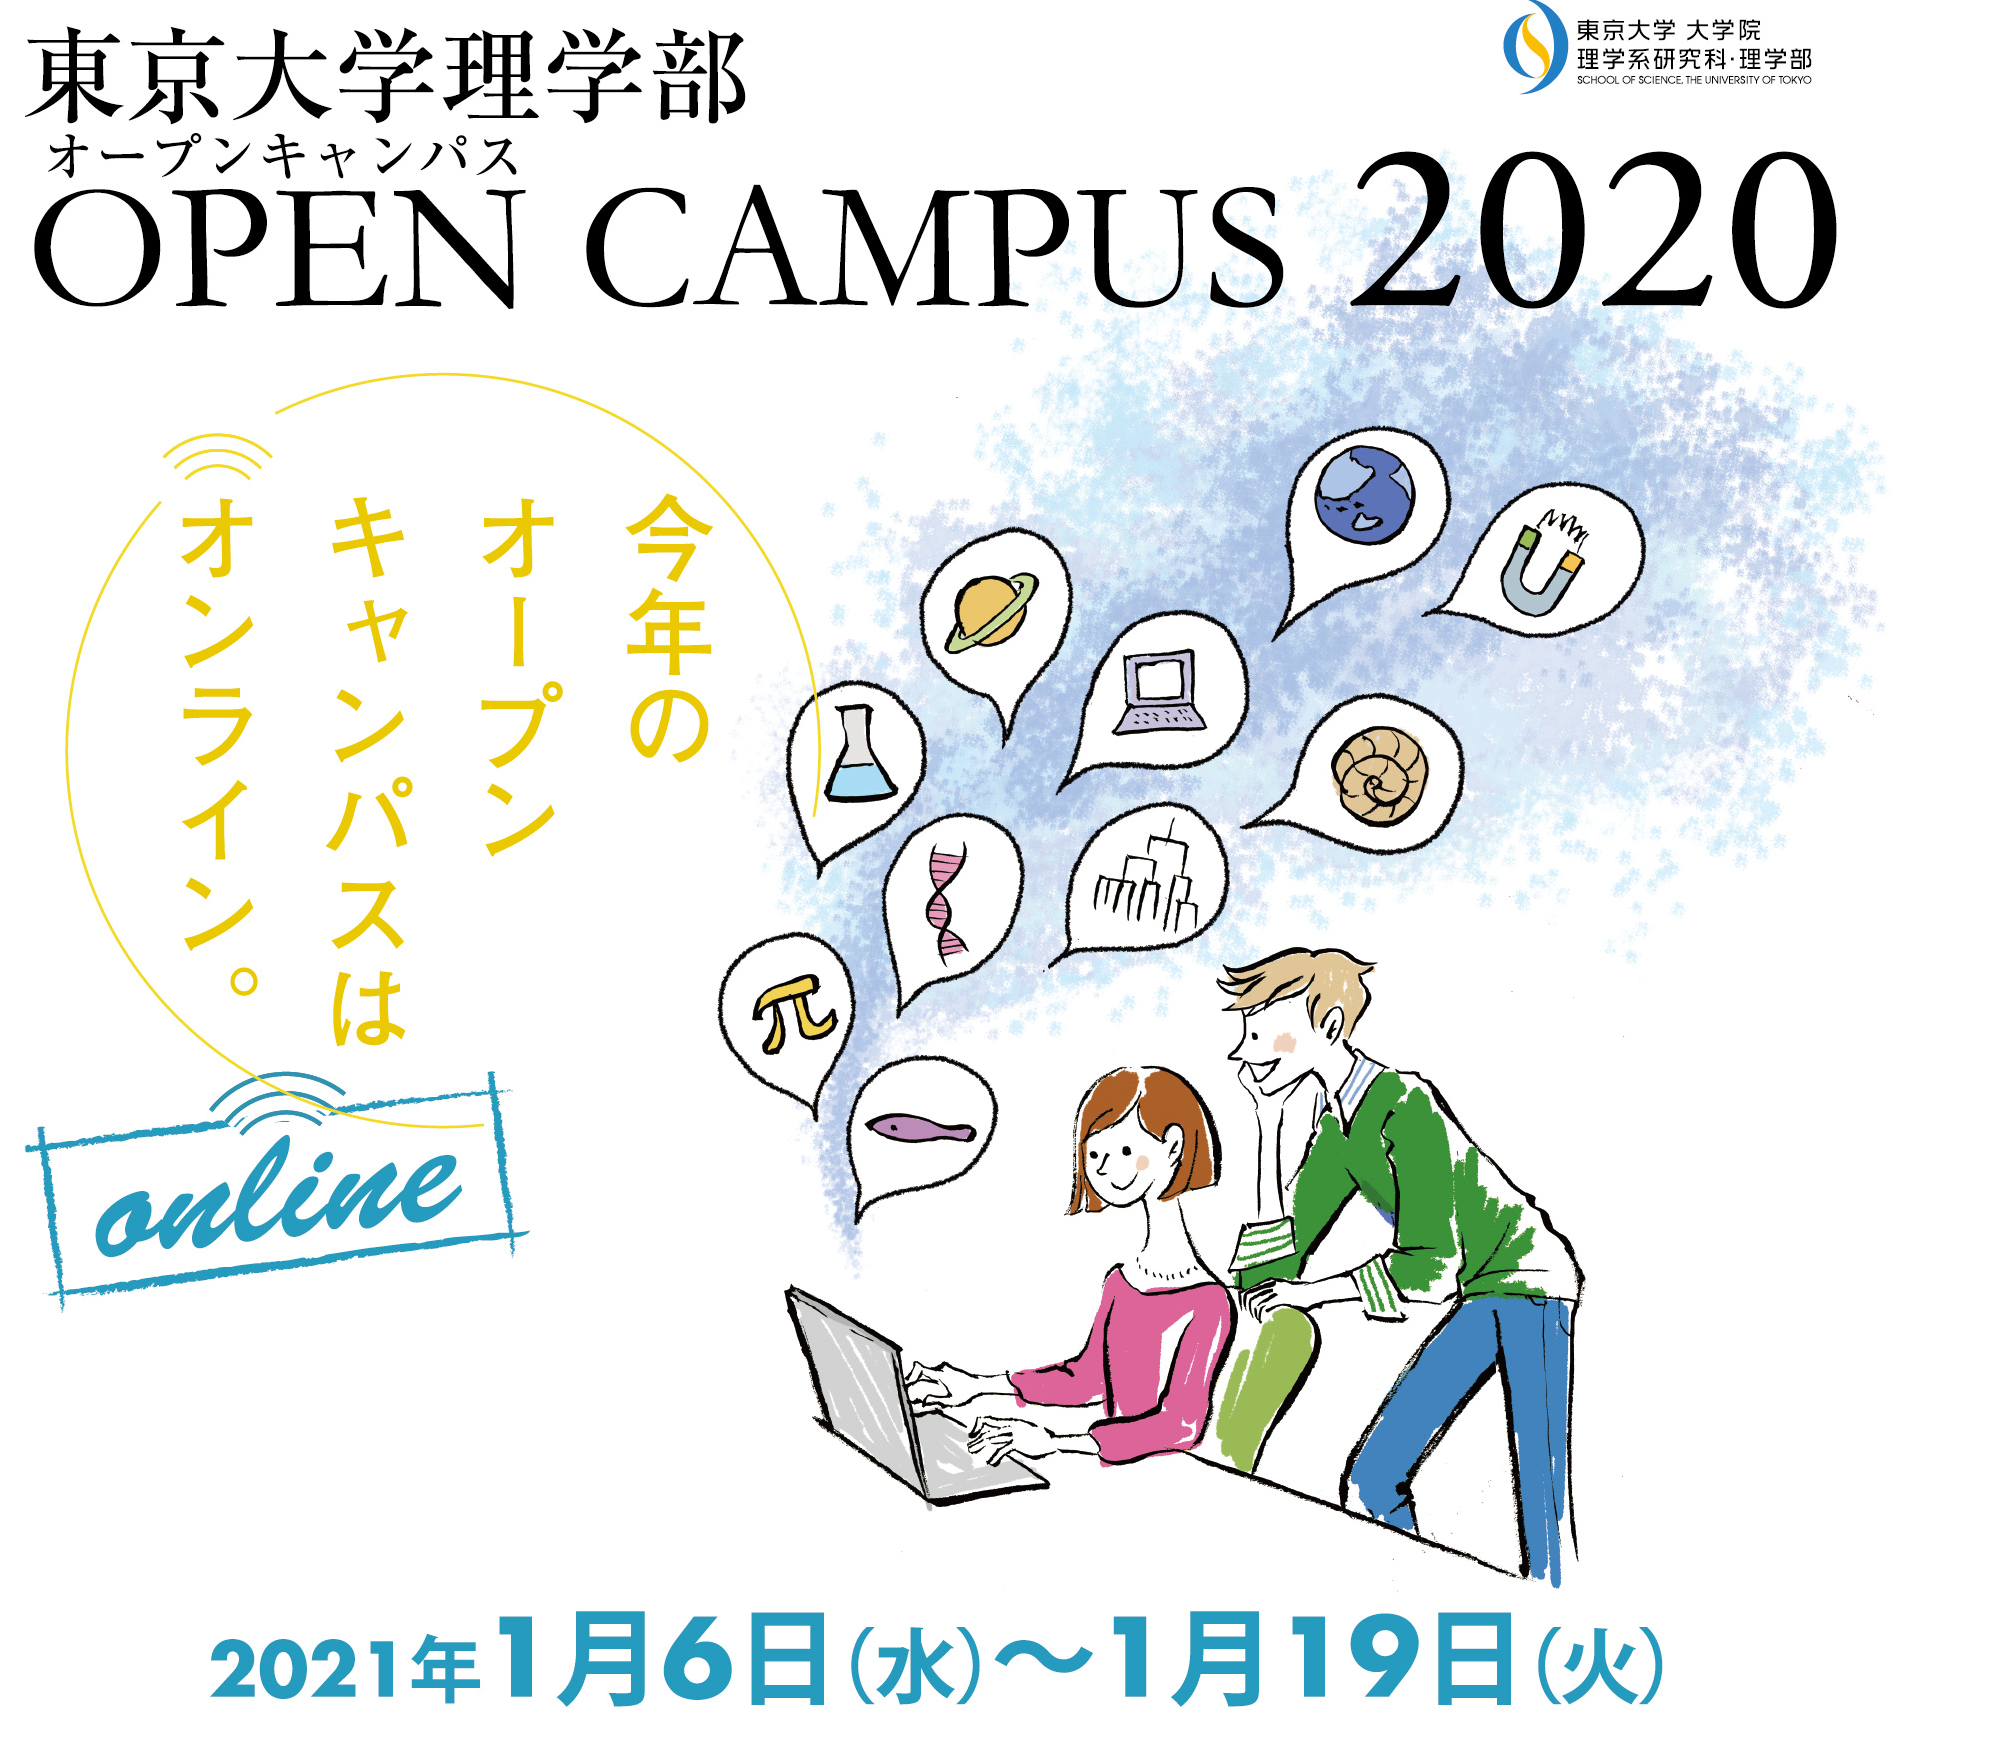 The University of Tokyo Faculty of Science Open Campus 2020 Online (Part 2)